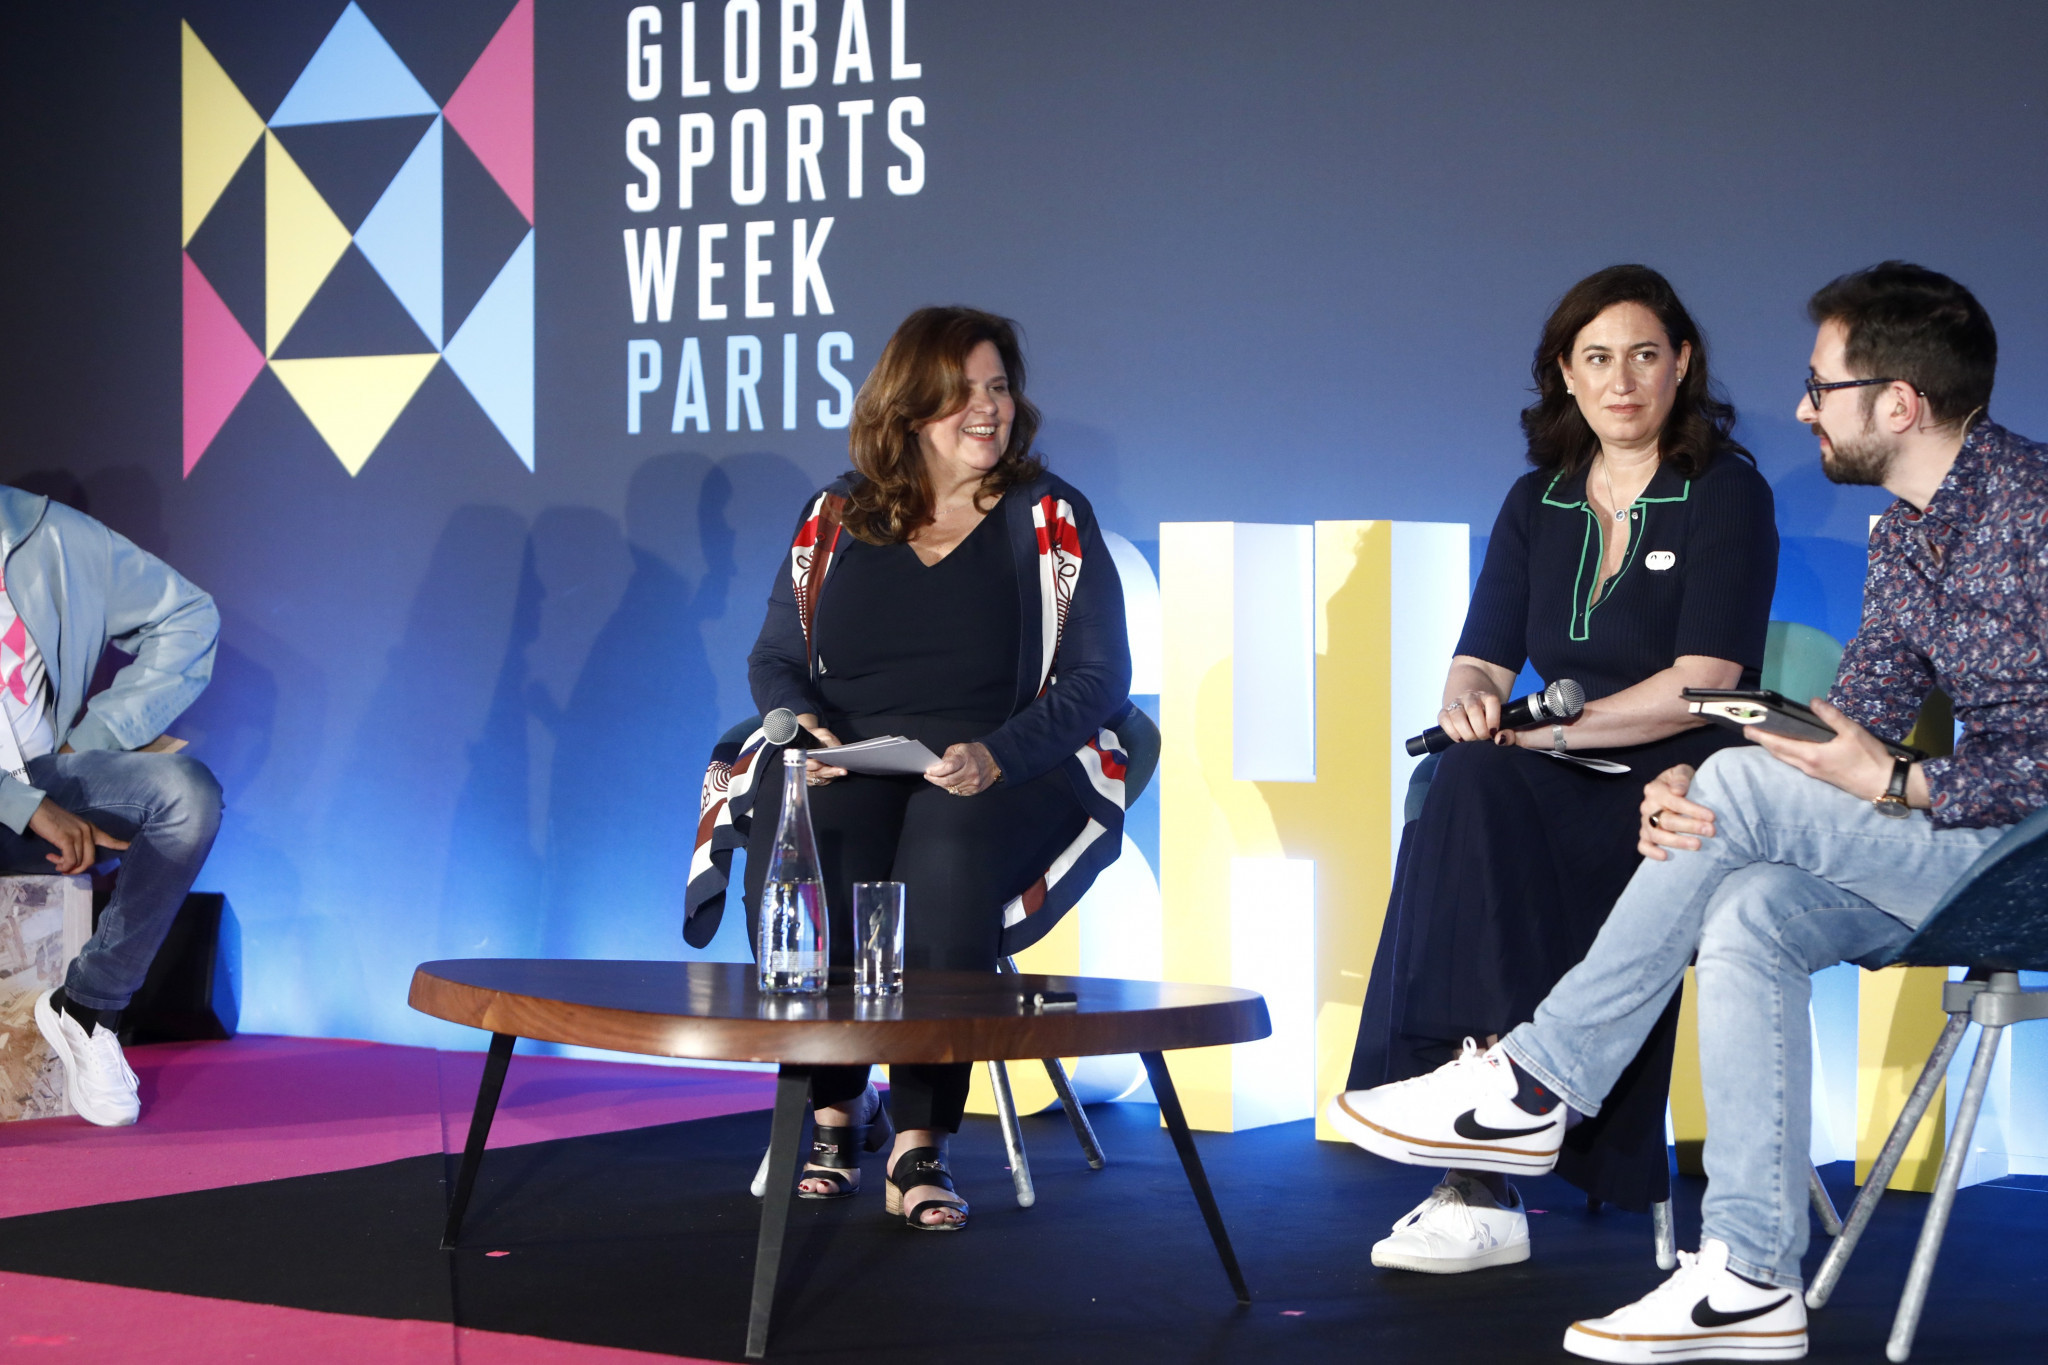 Nathalie Bellon-Szabo, left, chief executive of Sodexo Live, and Georgina Grenon, sustainability director for Paris 2024, spoke at Global Sports Week ©Getty Images